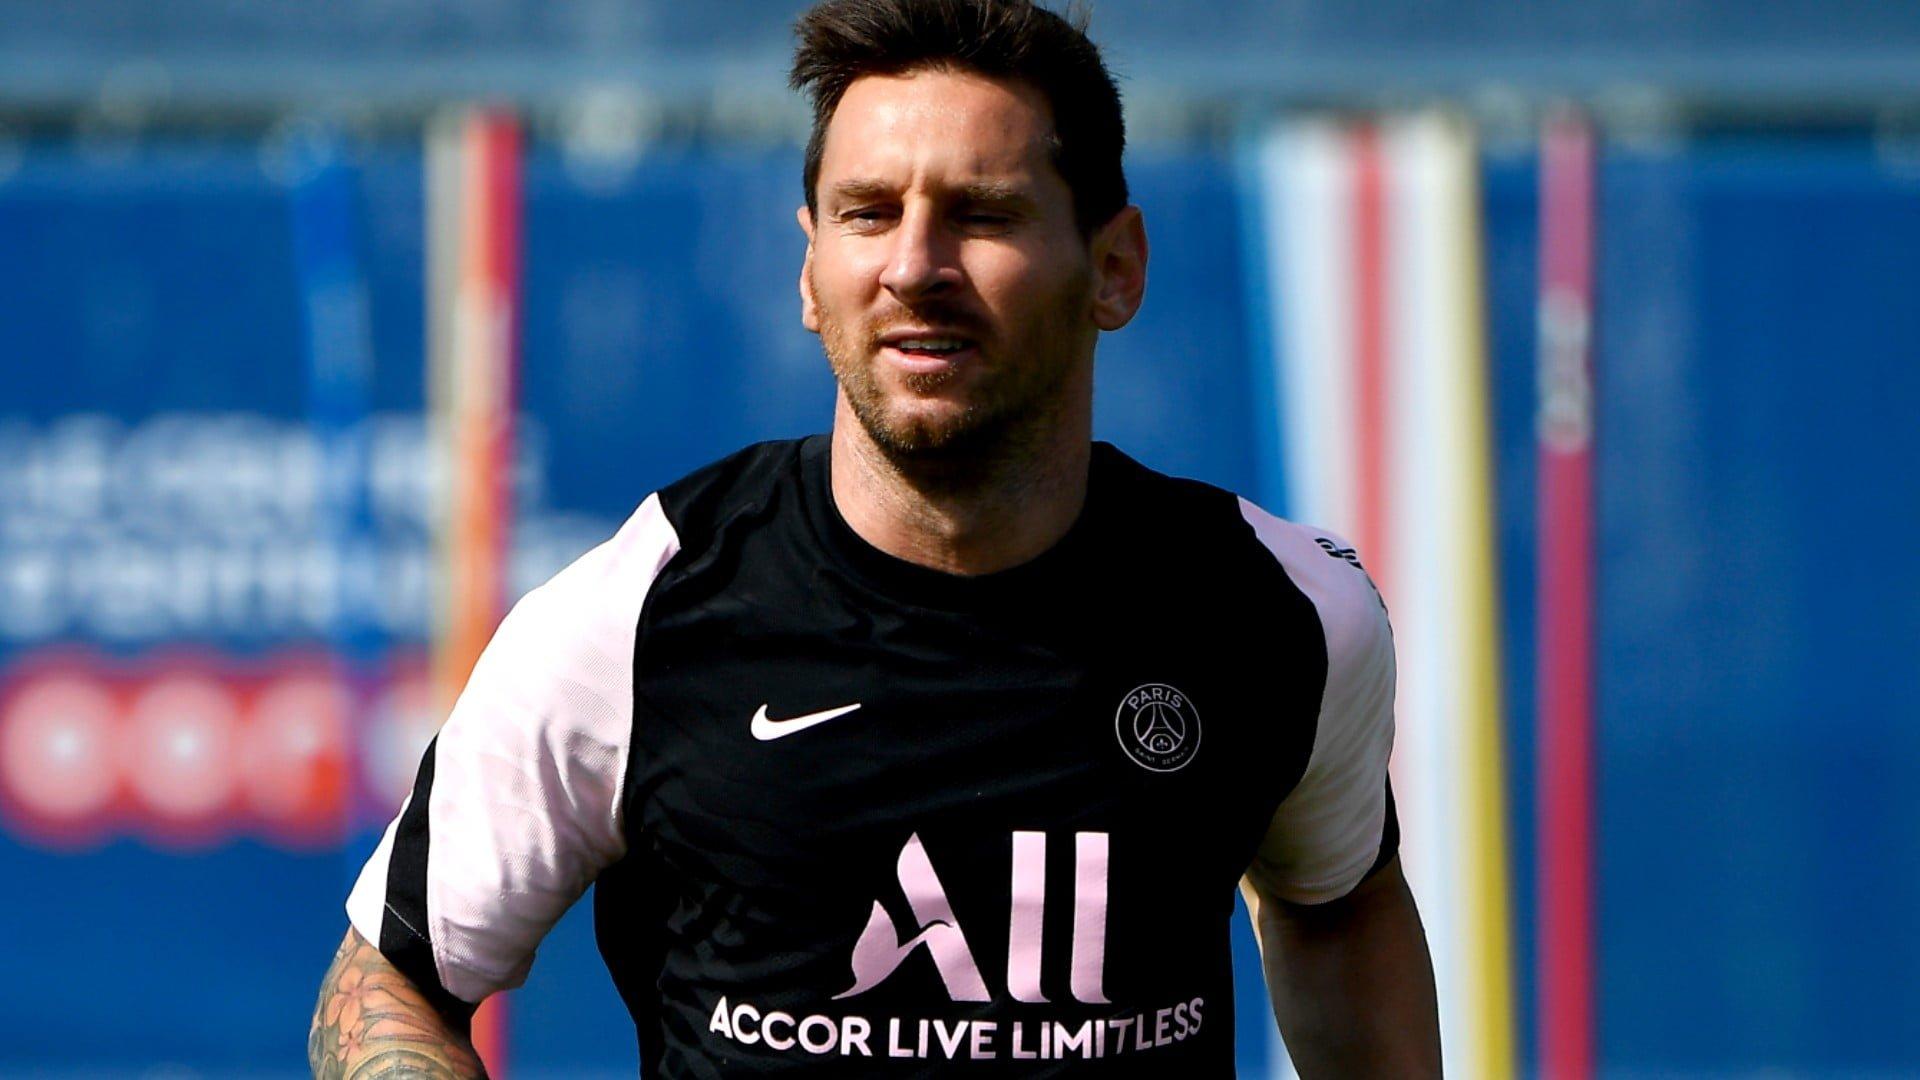 Messi to join Al Nassr’s rivals, overtake Ronaldo as highest-paid footballer